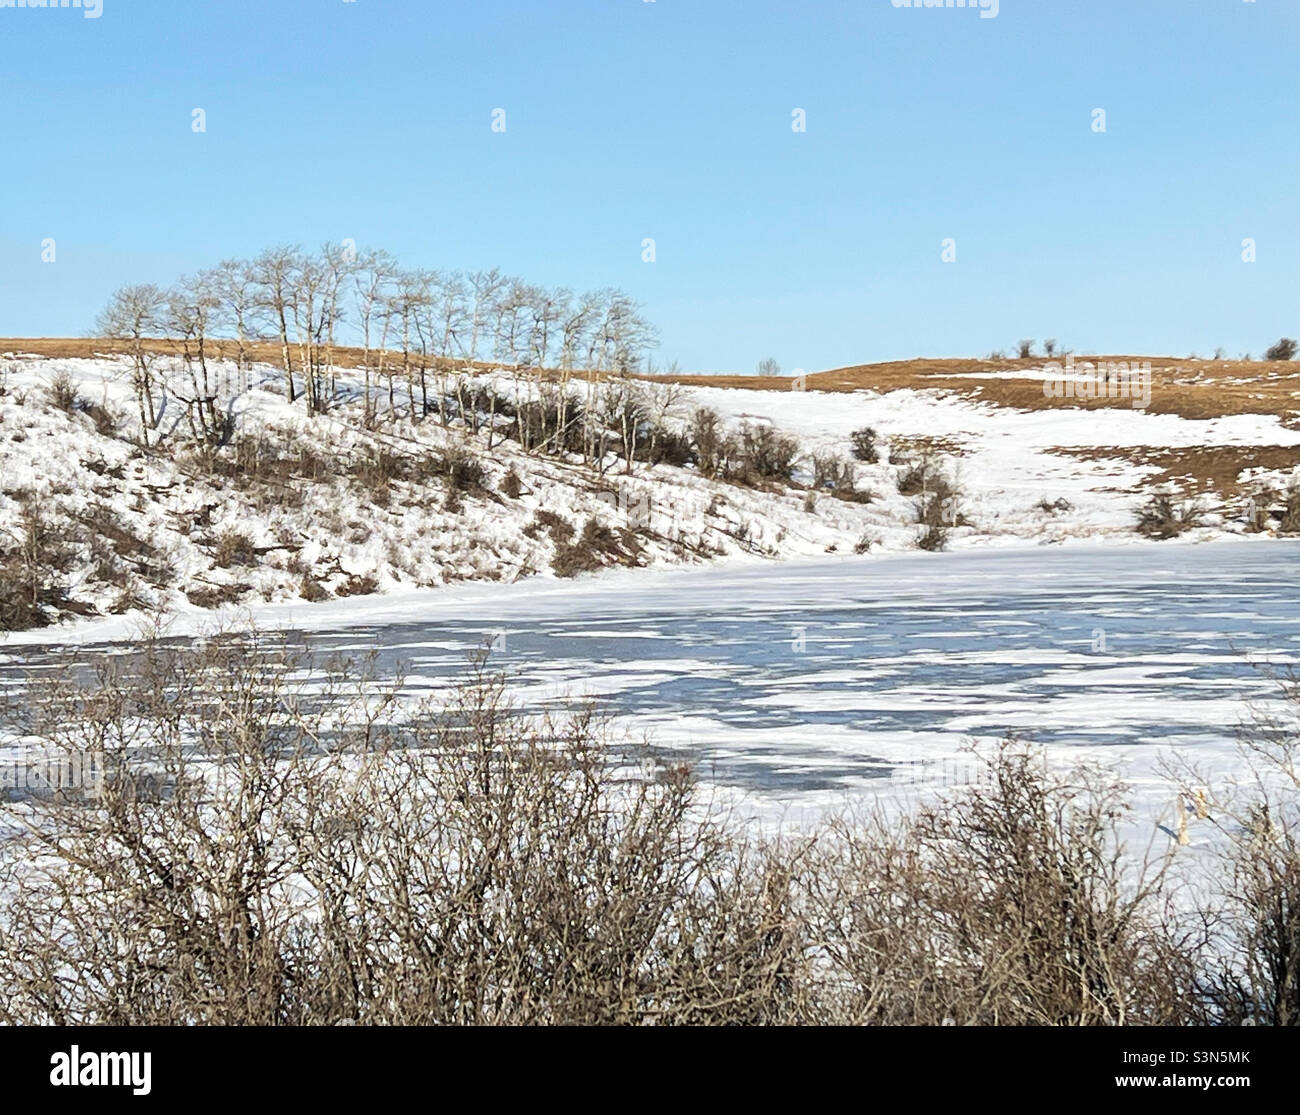 Pond partially covered in snow, starting to melt after a period of mild weather. Foothills, near Calgary, Alberta, Canada. Stock Photo